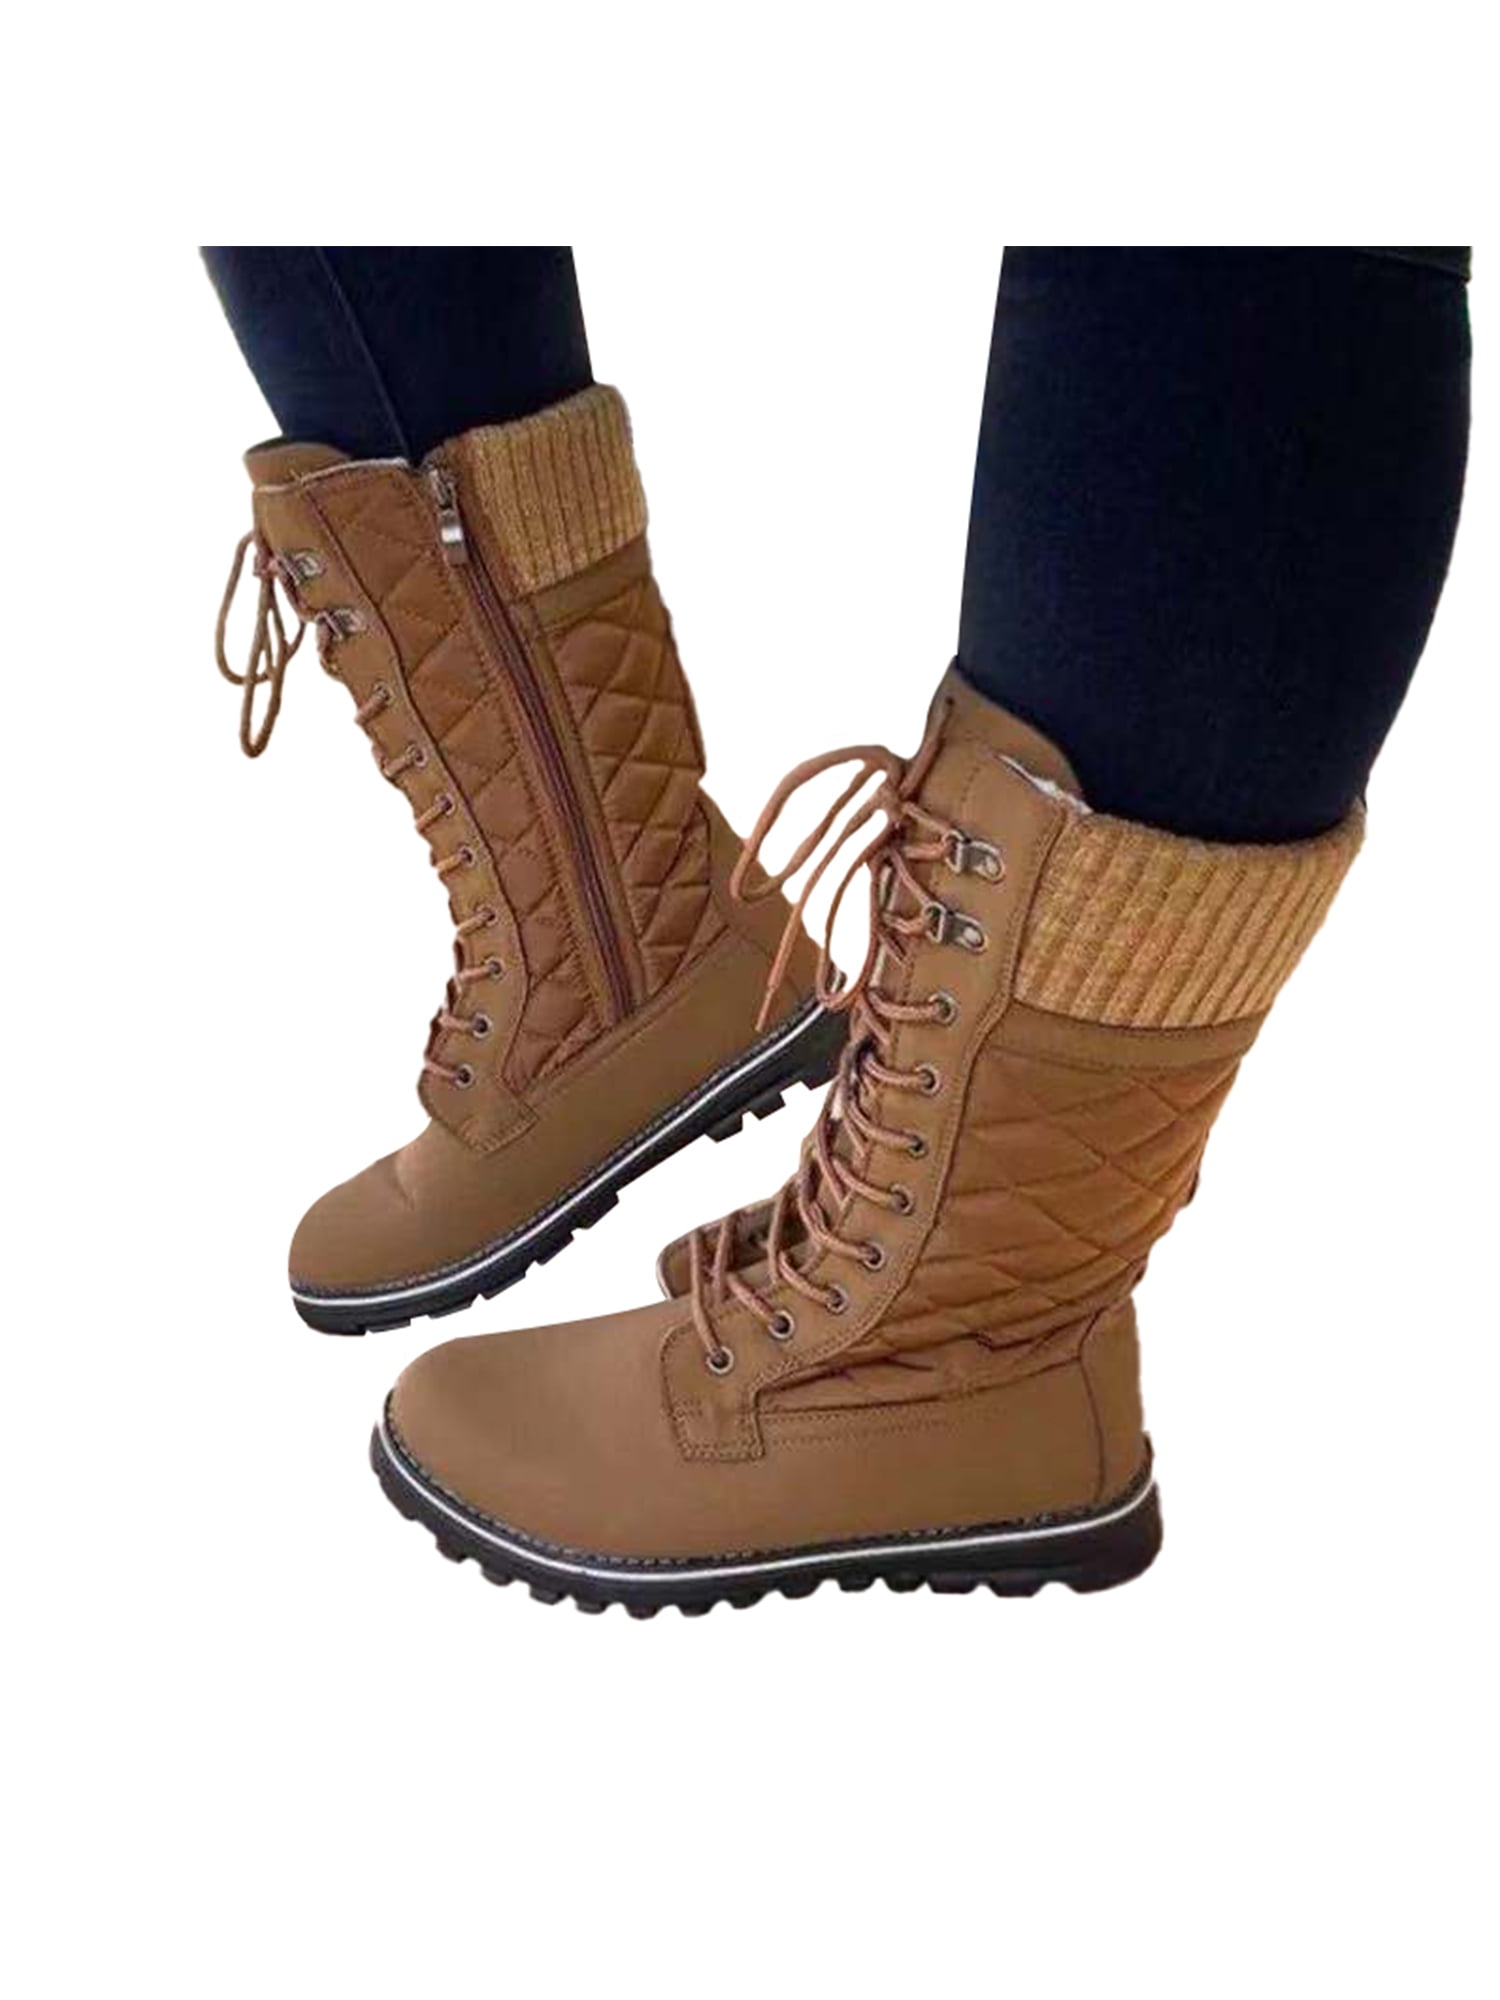 Women Fur Lined Snow Boots Winter Warm Mid Calf Flat Zip Casual Shoes Size 6-10